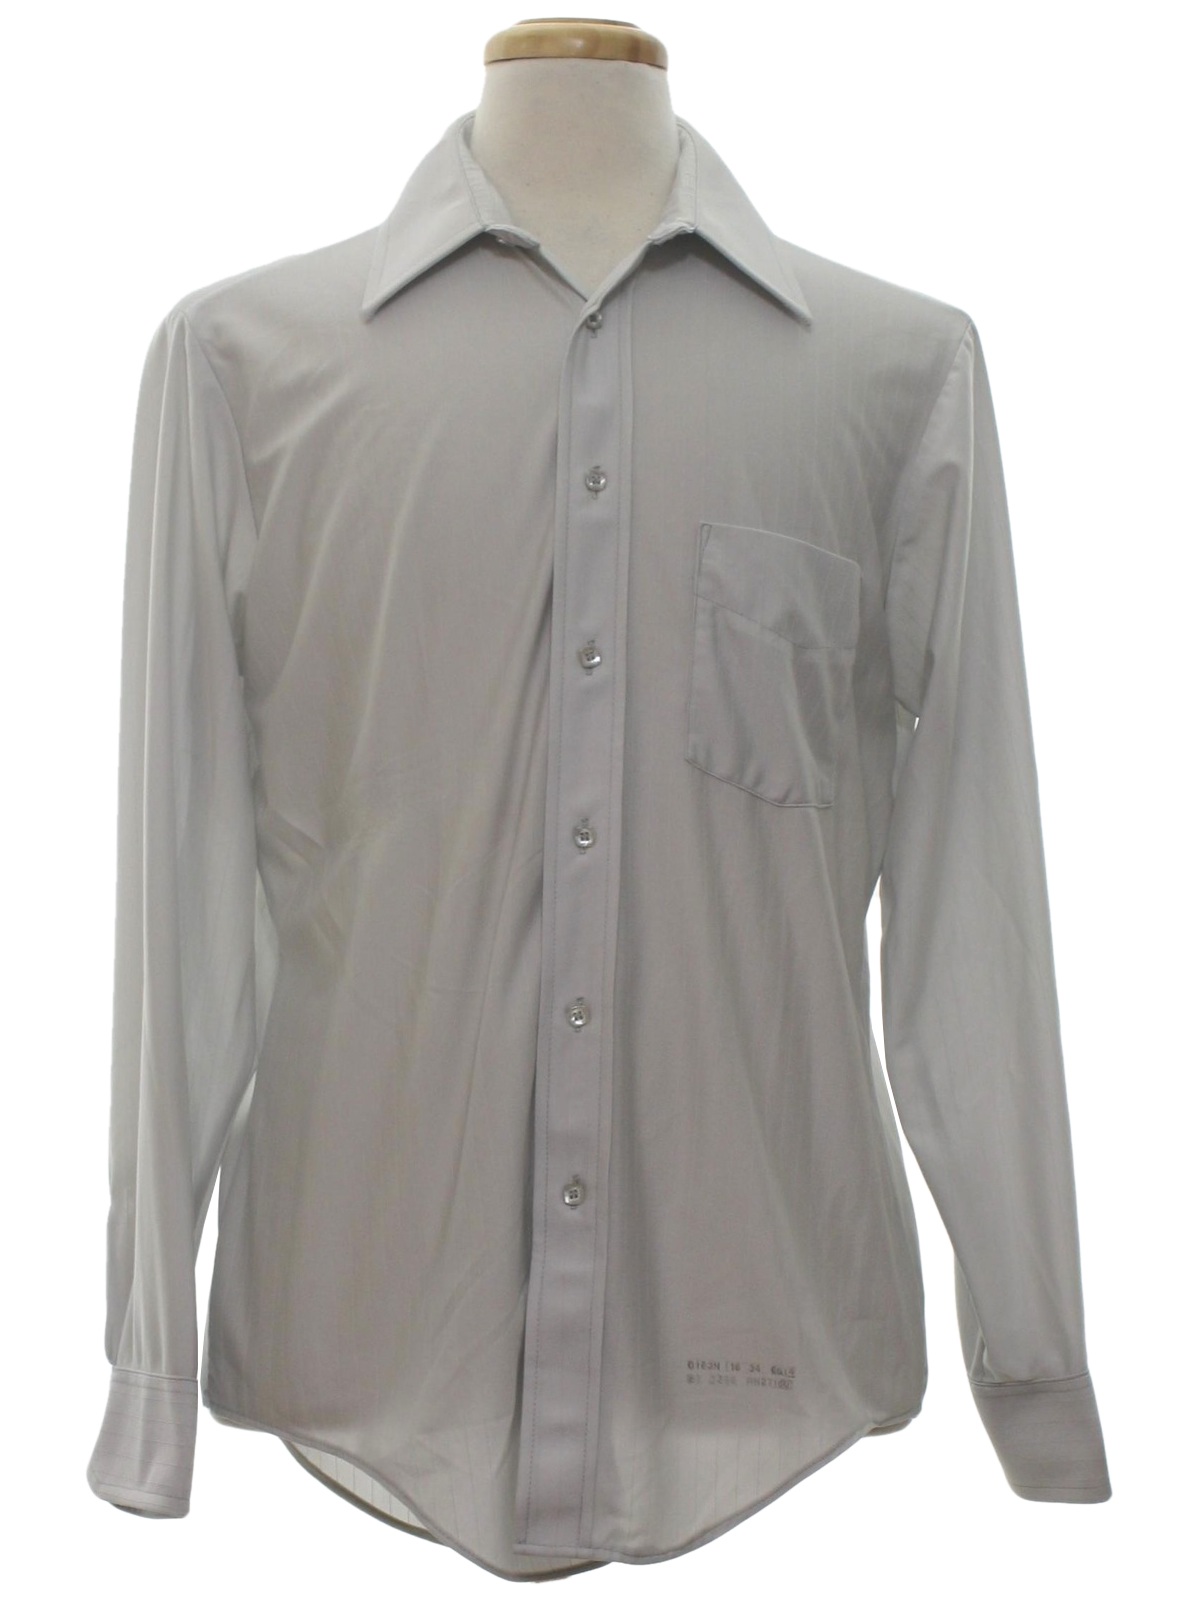 Vintage JCPenney Eighties Shirt: 80s -JCPenney- Mens soft grey, qiana ...